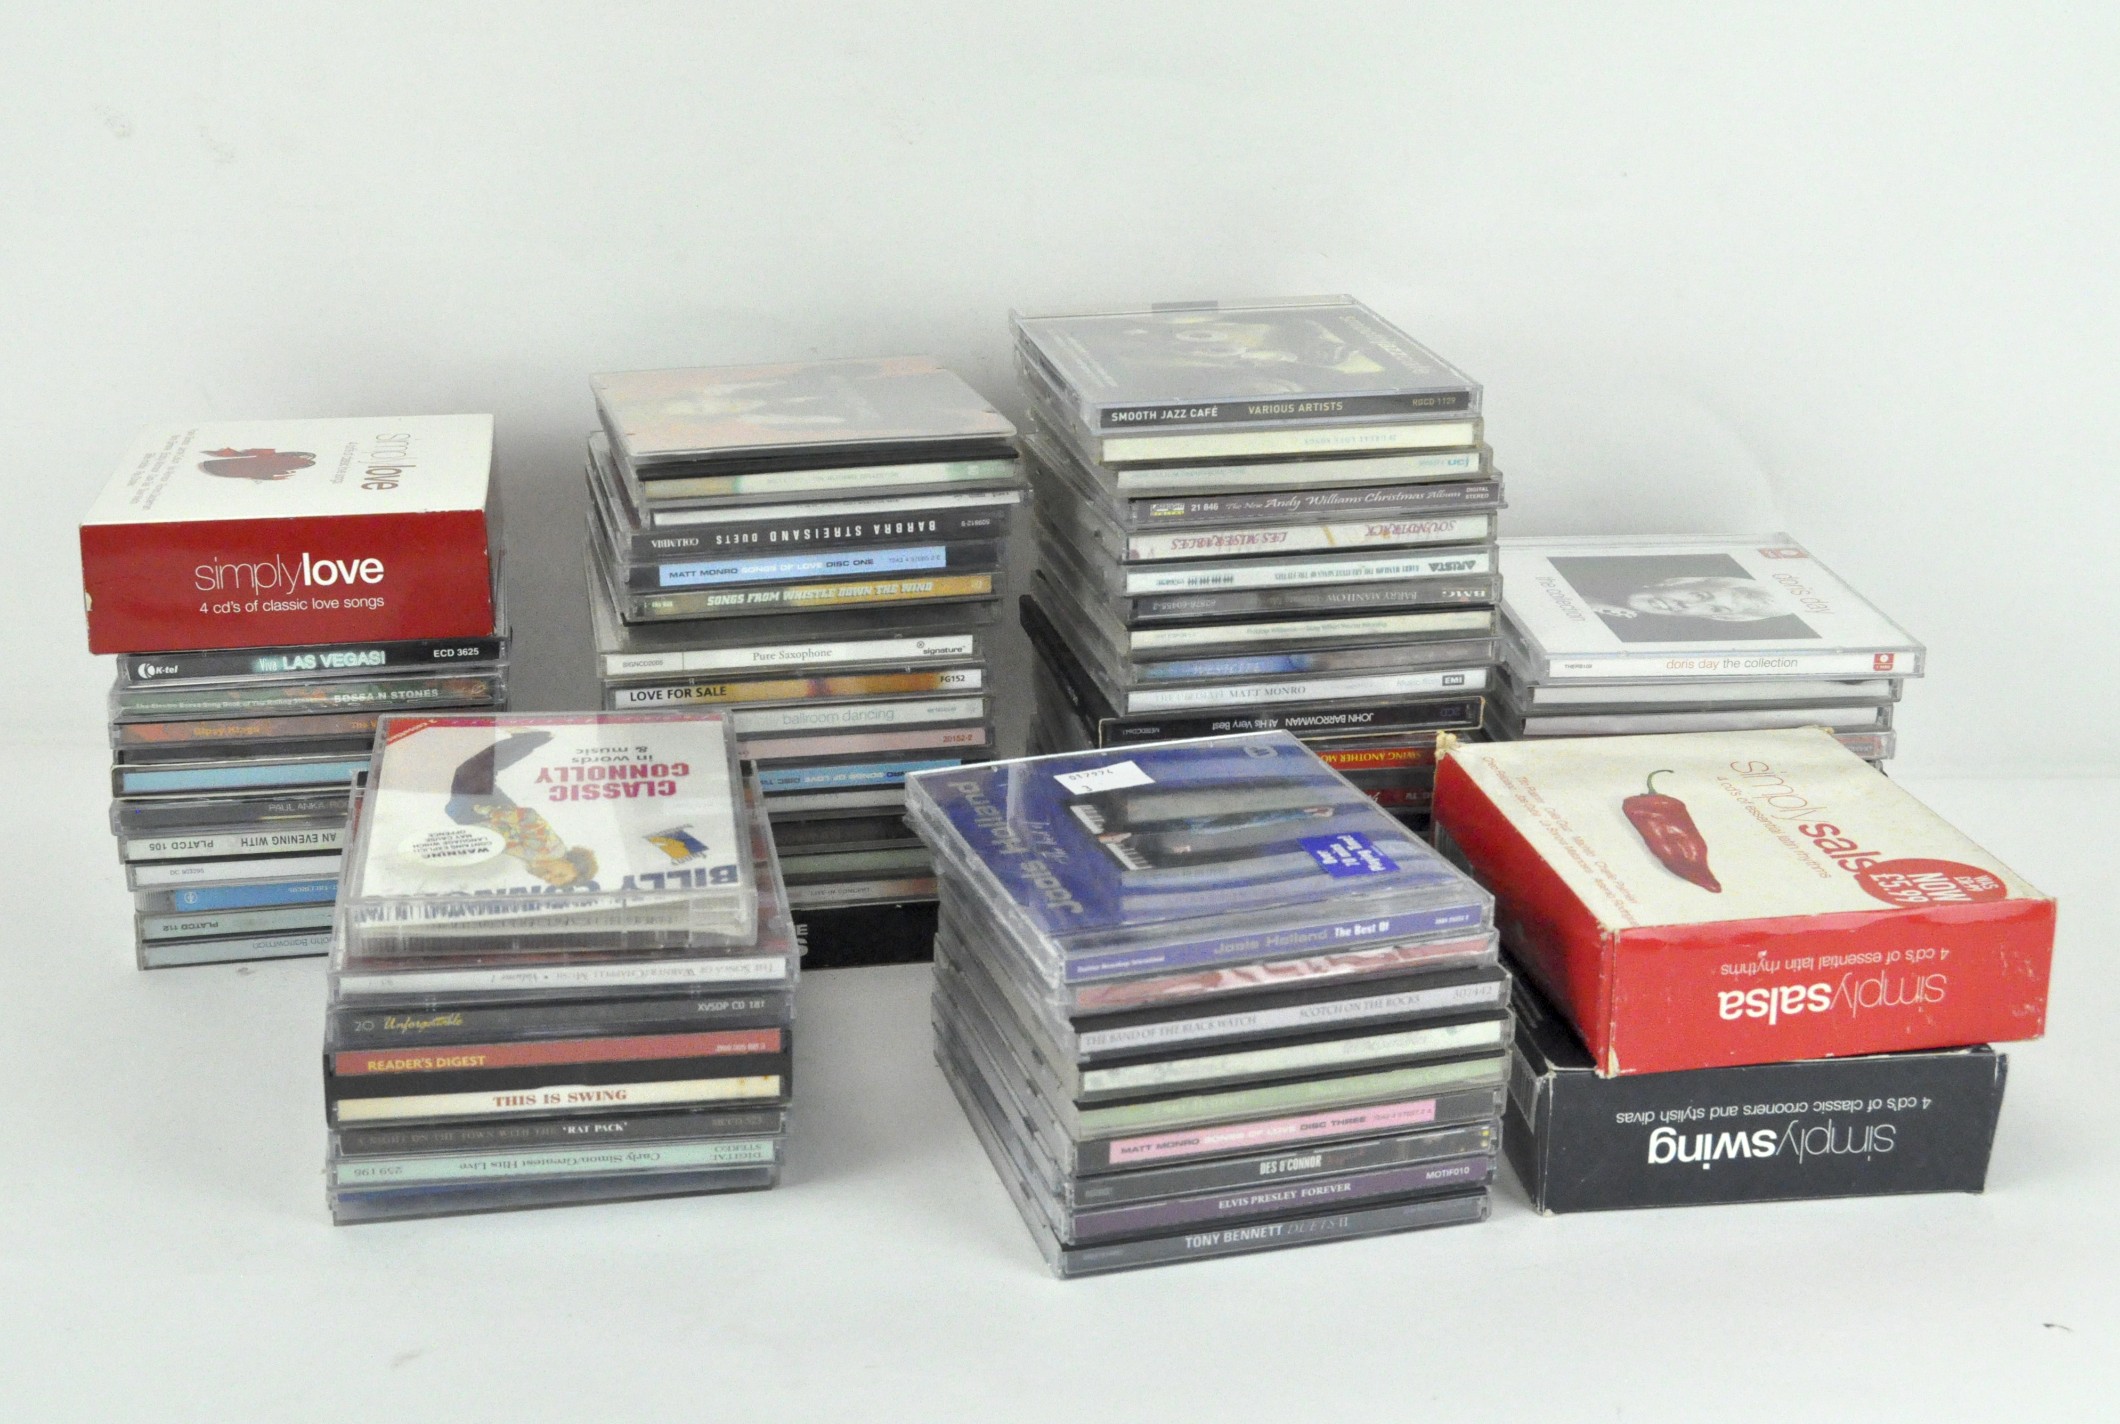 A collection of approx 100 CDs